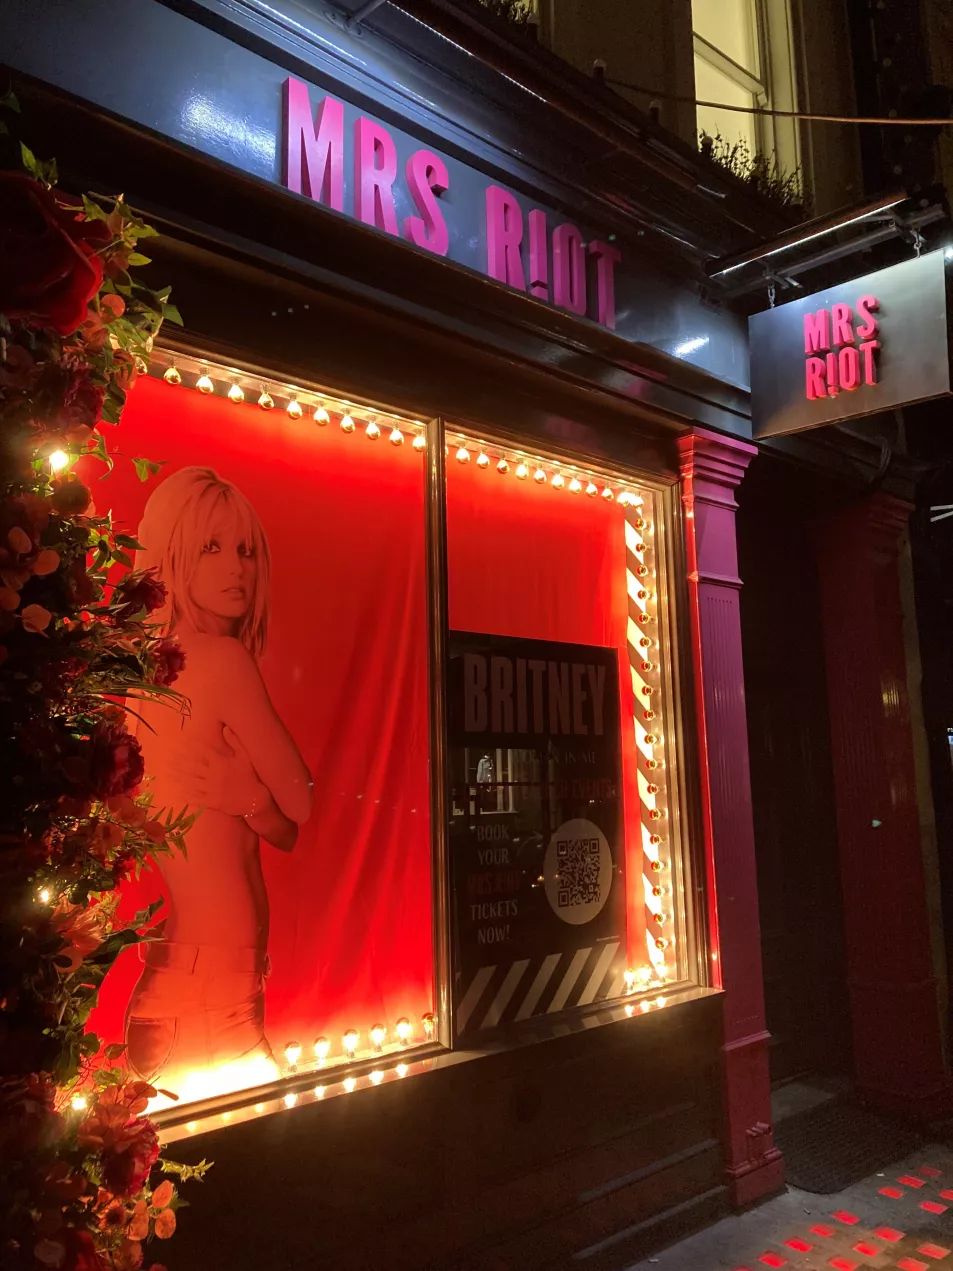 The Mrs Riot bar in Covent Garden was the venue for the UK launch party